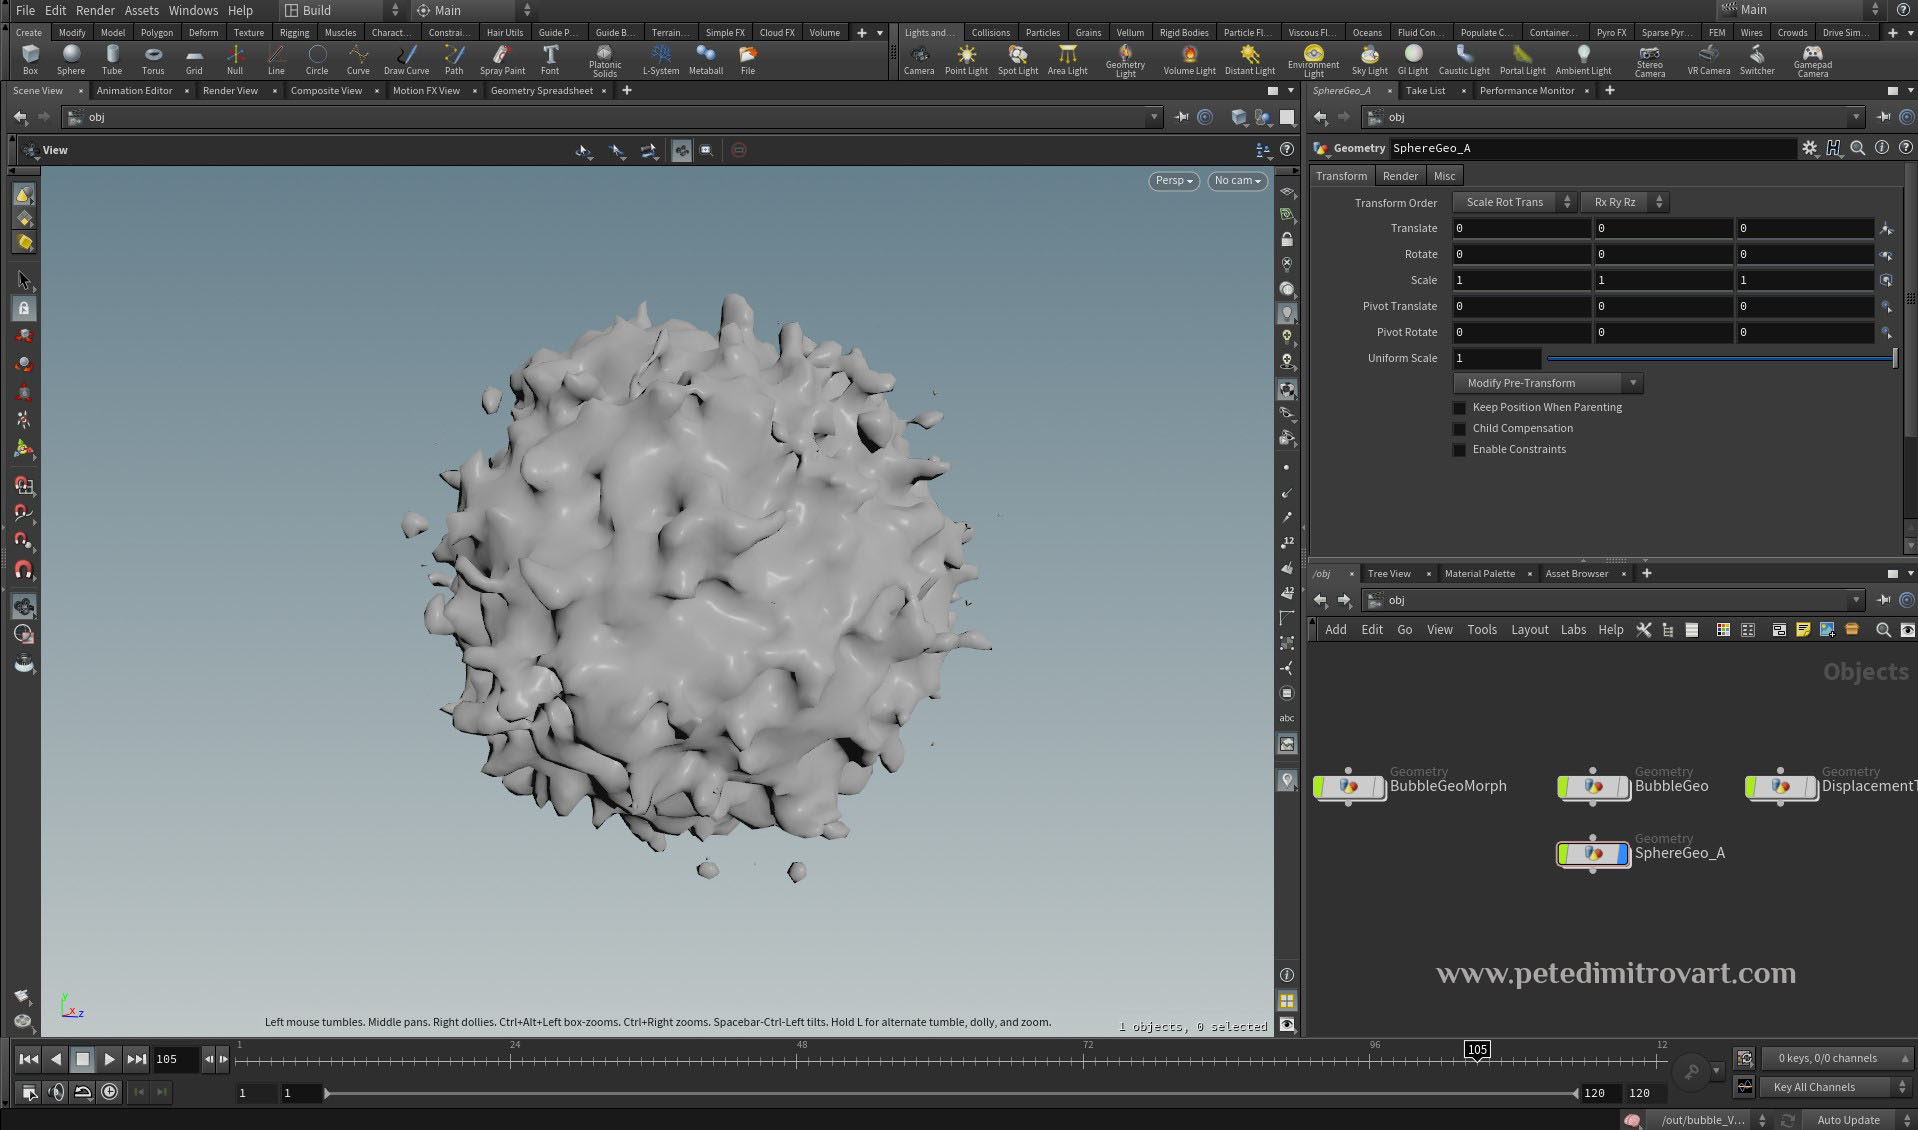 Houdini screenshot. UI of the software is seen and in the left viewport one can inspect the fuzzy orb mesh.